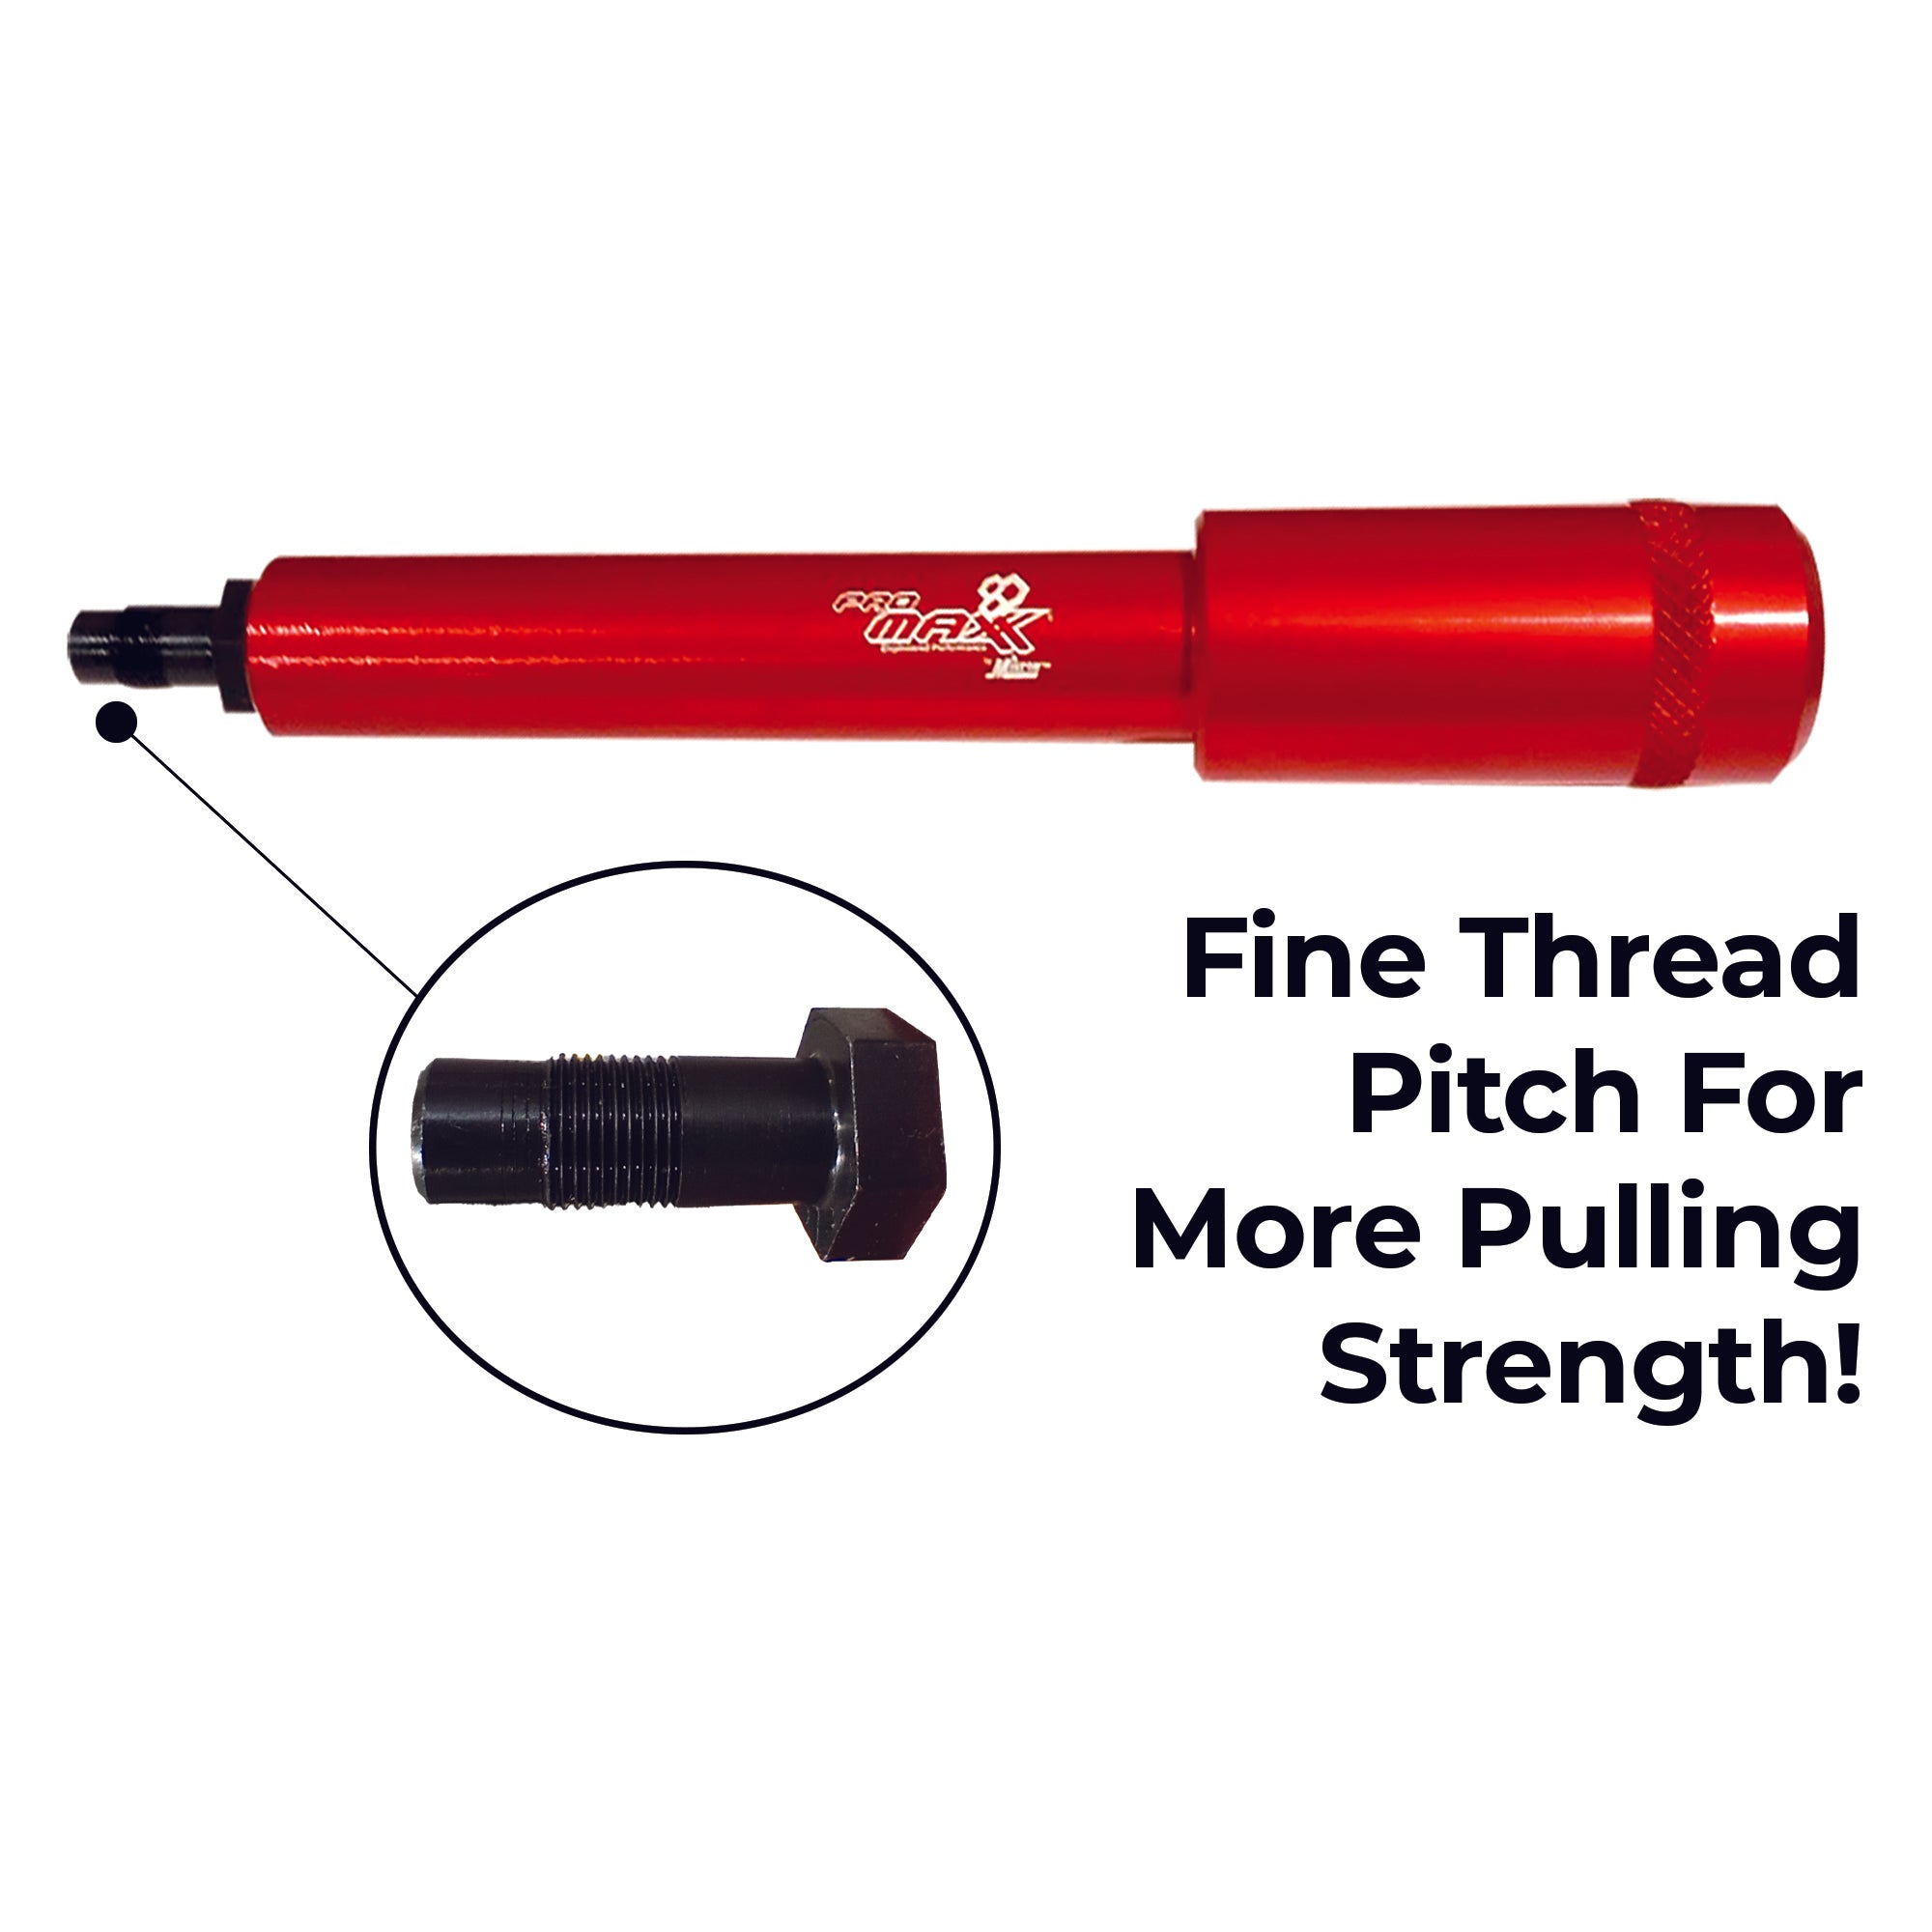 Fine Thread Pitch For More Pulling Strength!